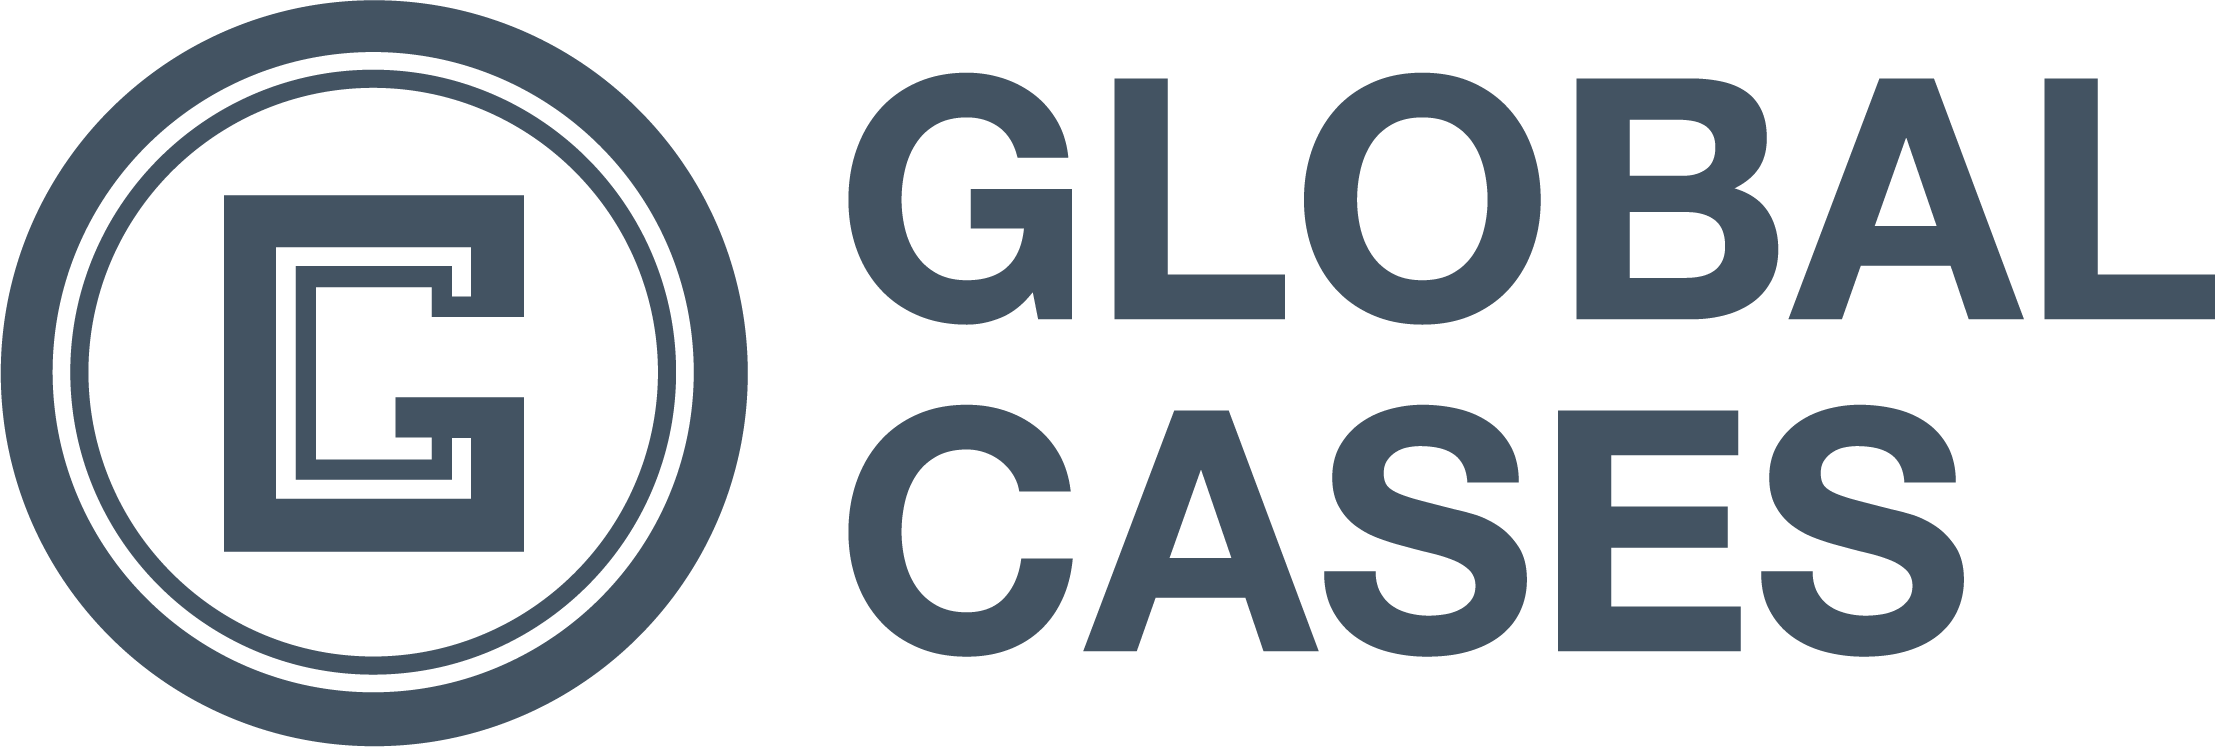 Image of Global Cases logo in color